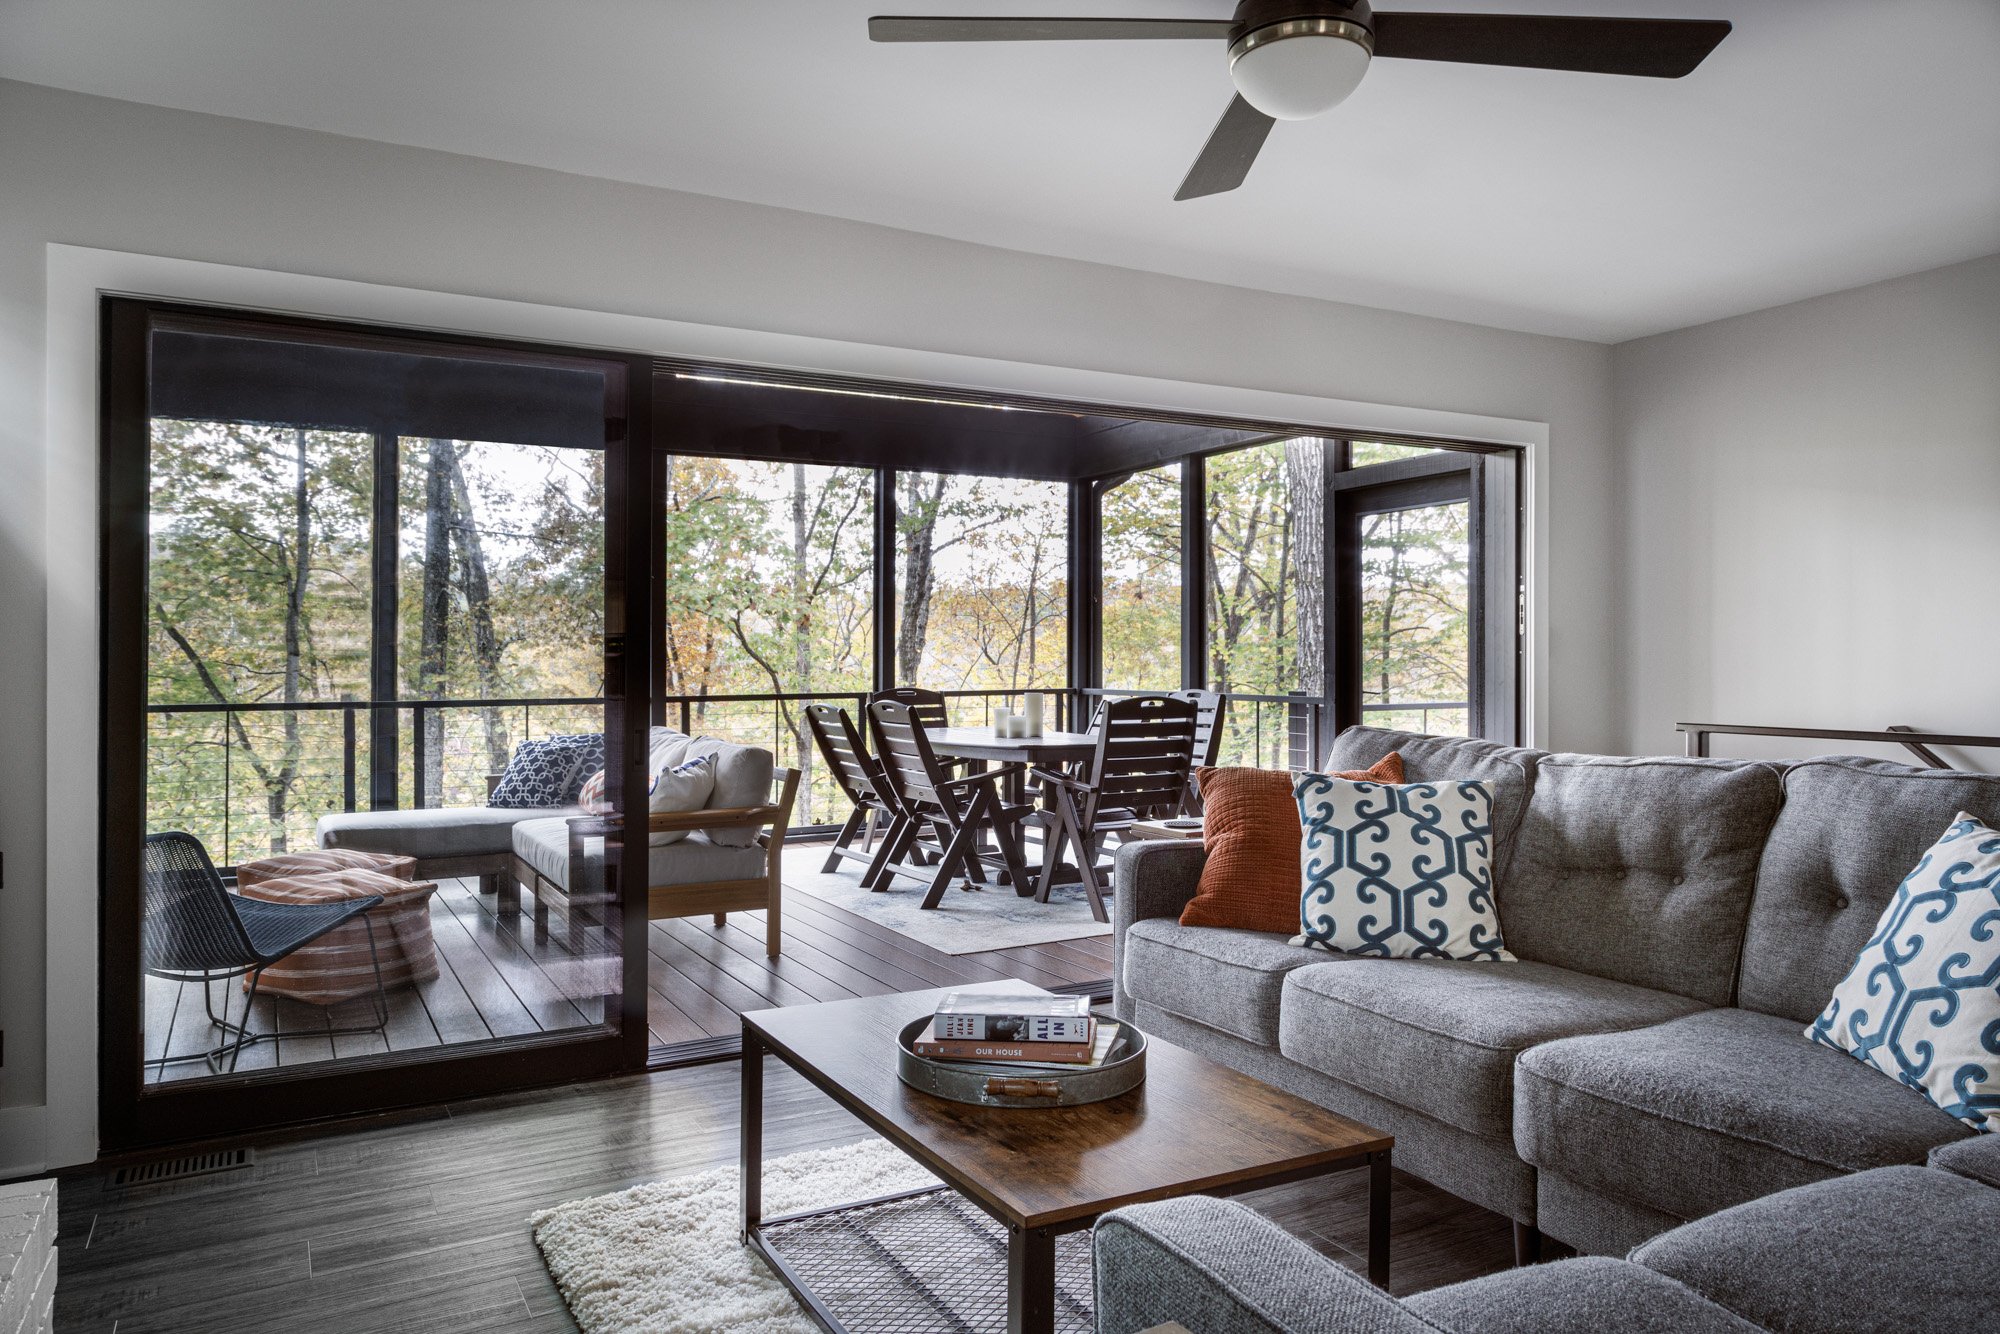 Stylish living room with large windows leading to a scenic deck surrounded by trees.